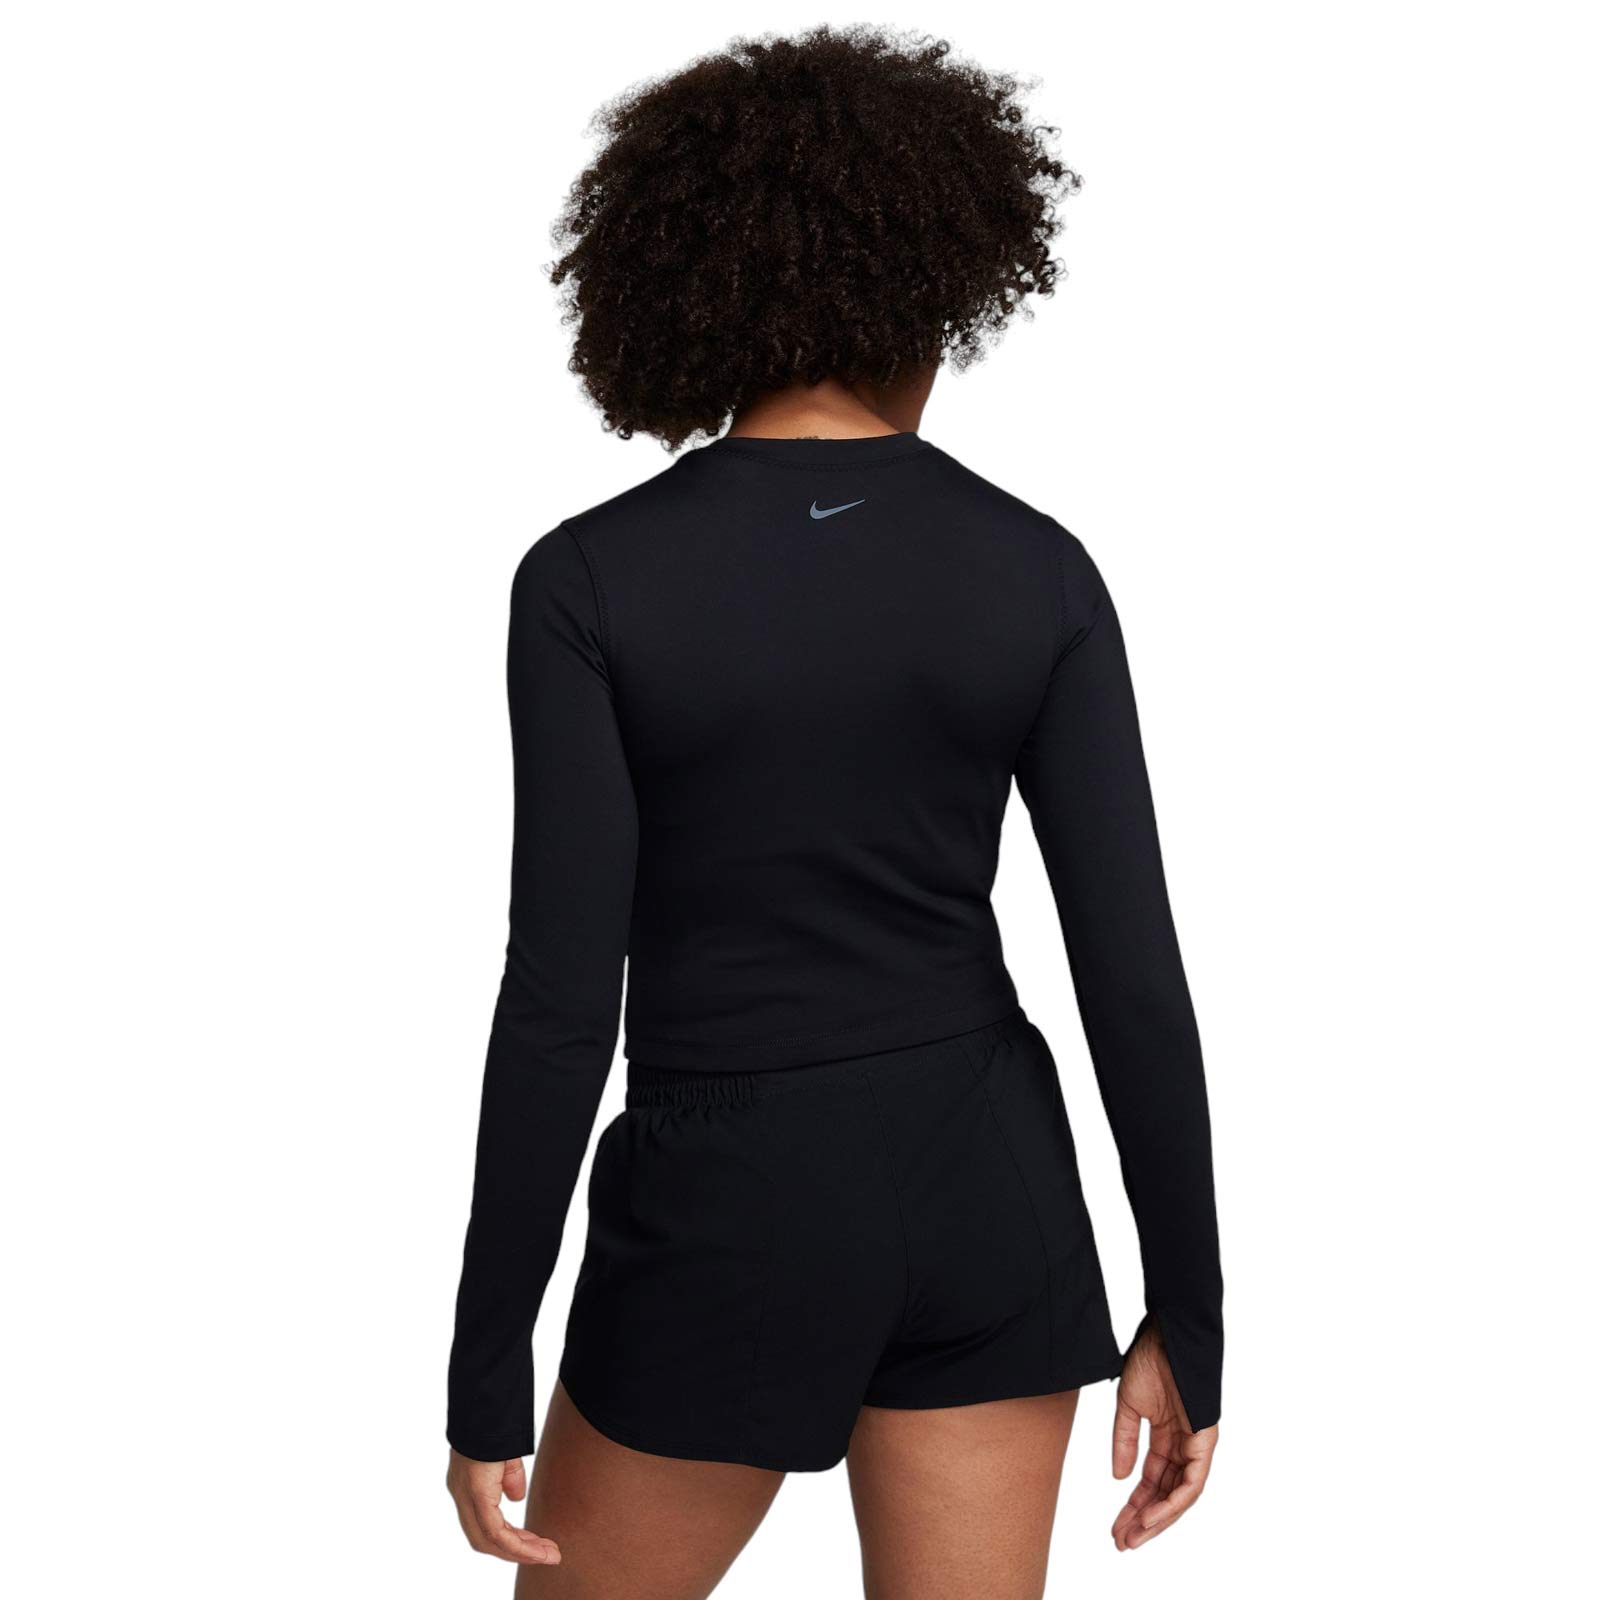 NIKE ONE FITTED WOMENS DRI-FIT LONG-SLEEVE TOP